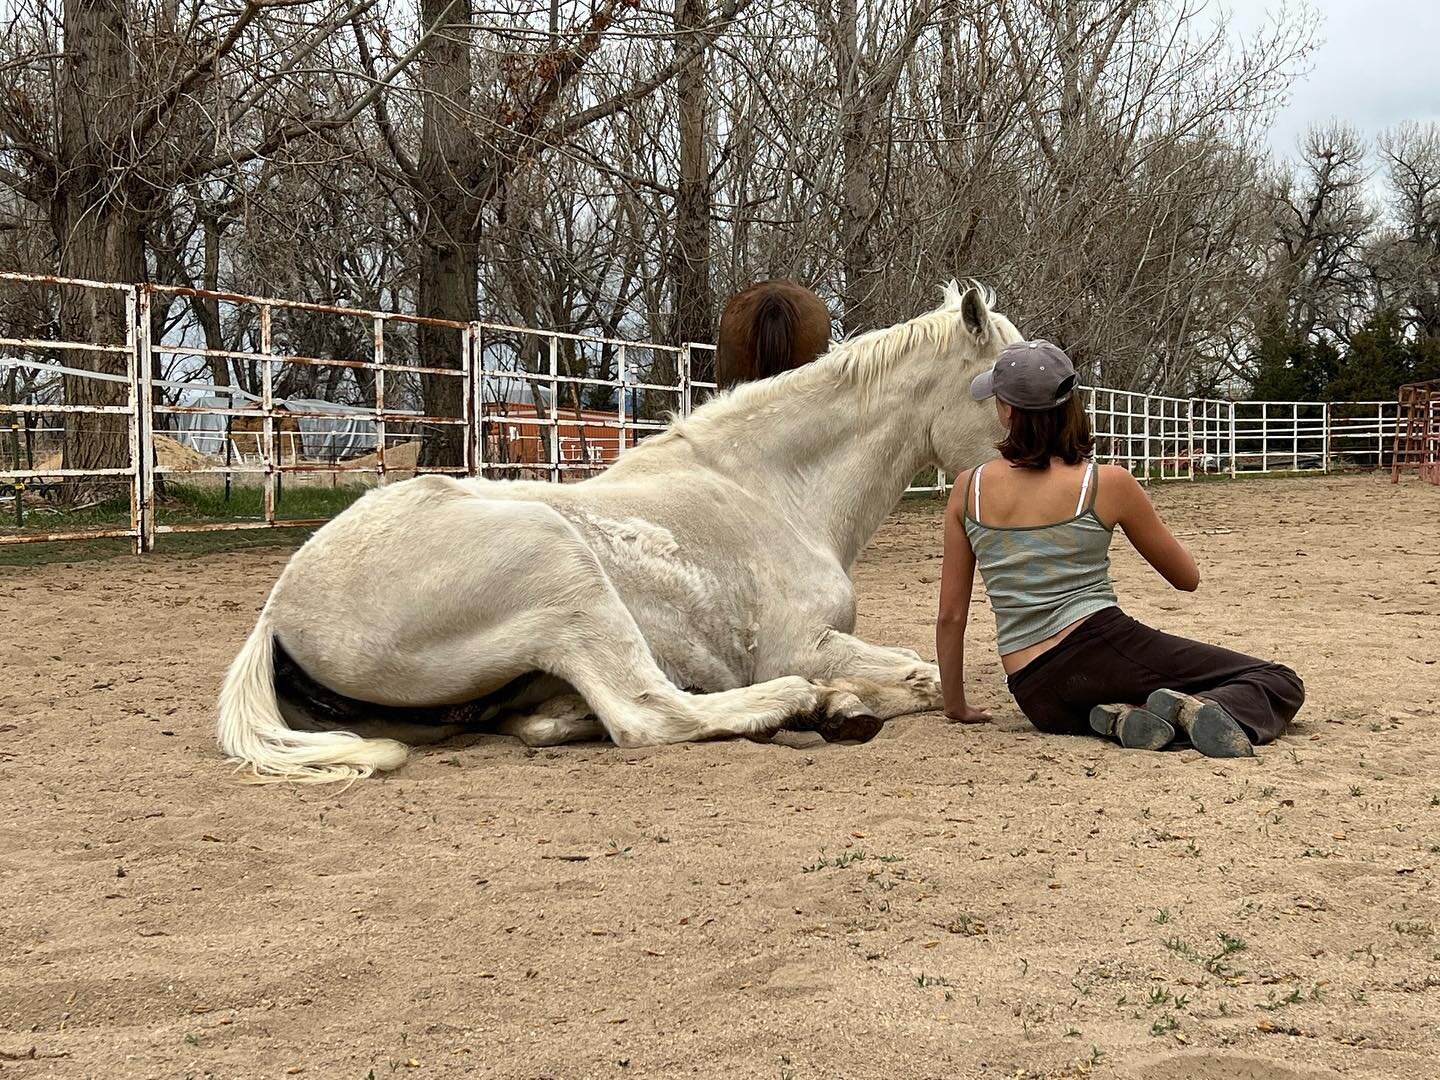 Beauty. Teens. Elder horses. All Teachers. The whole of us students to softening, to rest. To love.
These moments of learning new patterns in the nervous system, body, and heart. Gratitude for youth sessions. #bridgingunicorns #lifeasart #youthleader